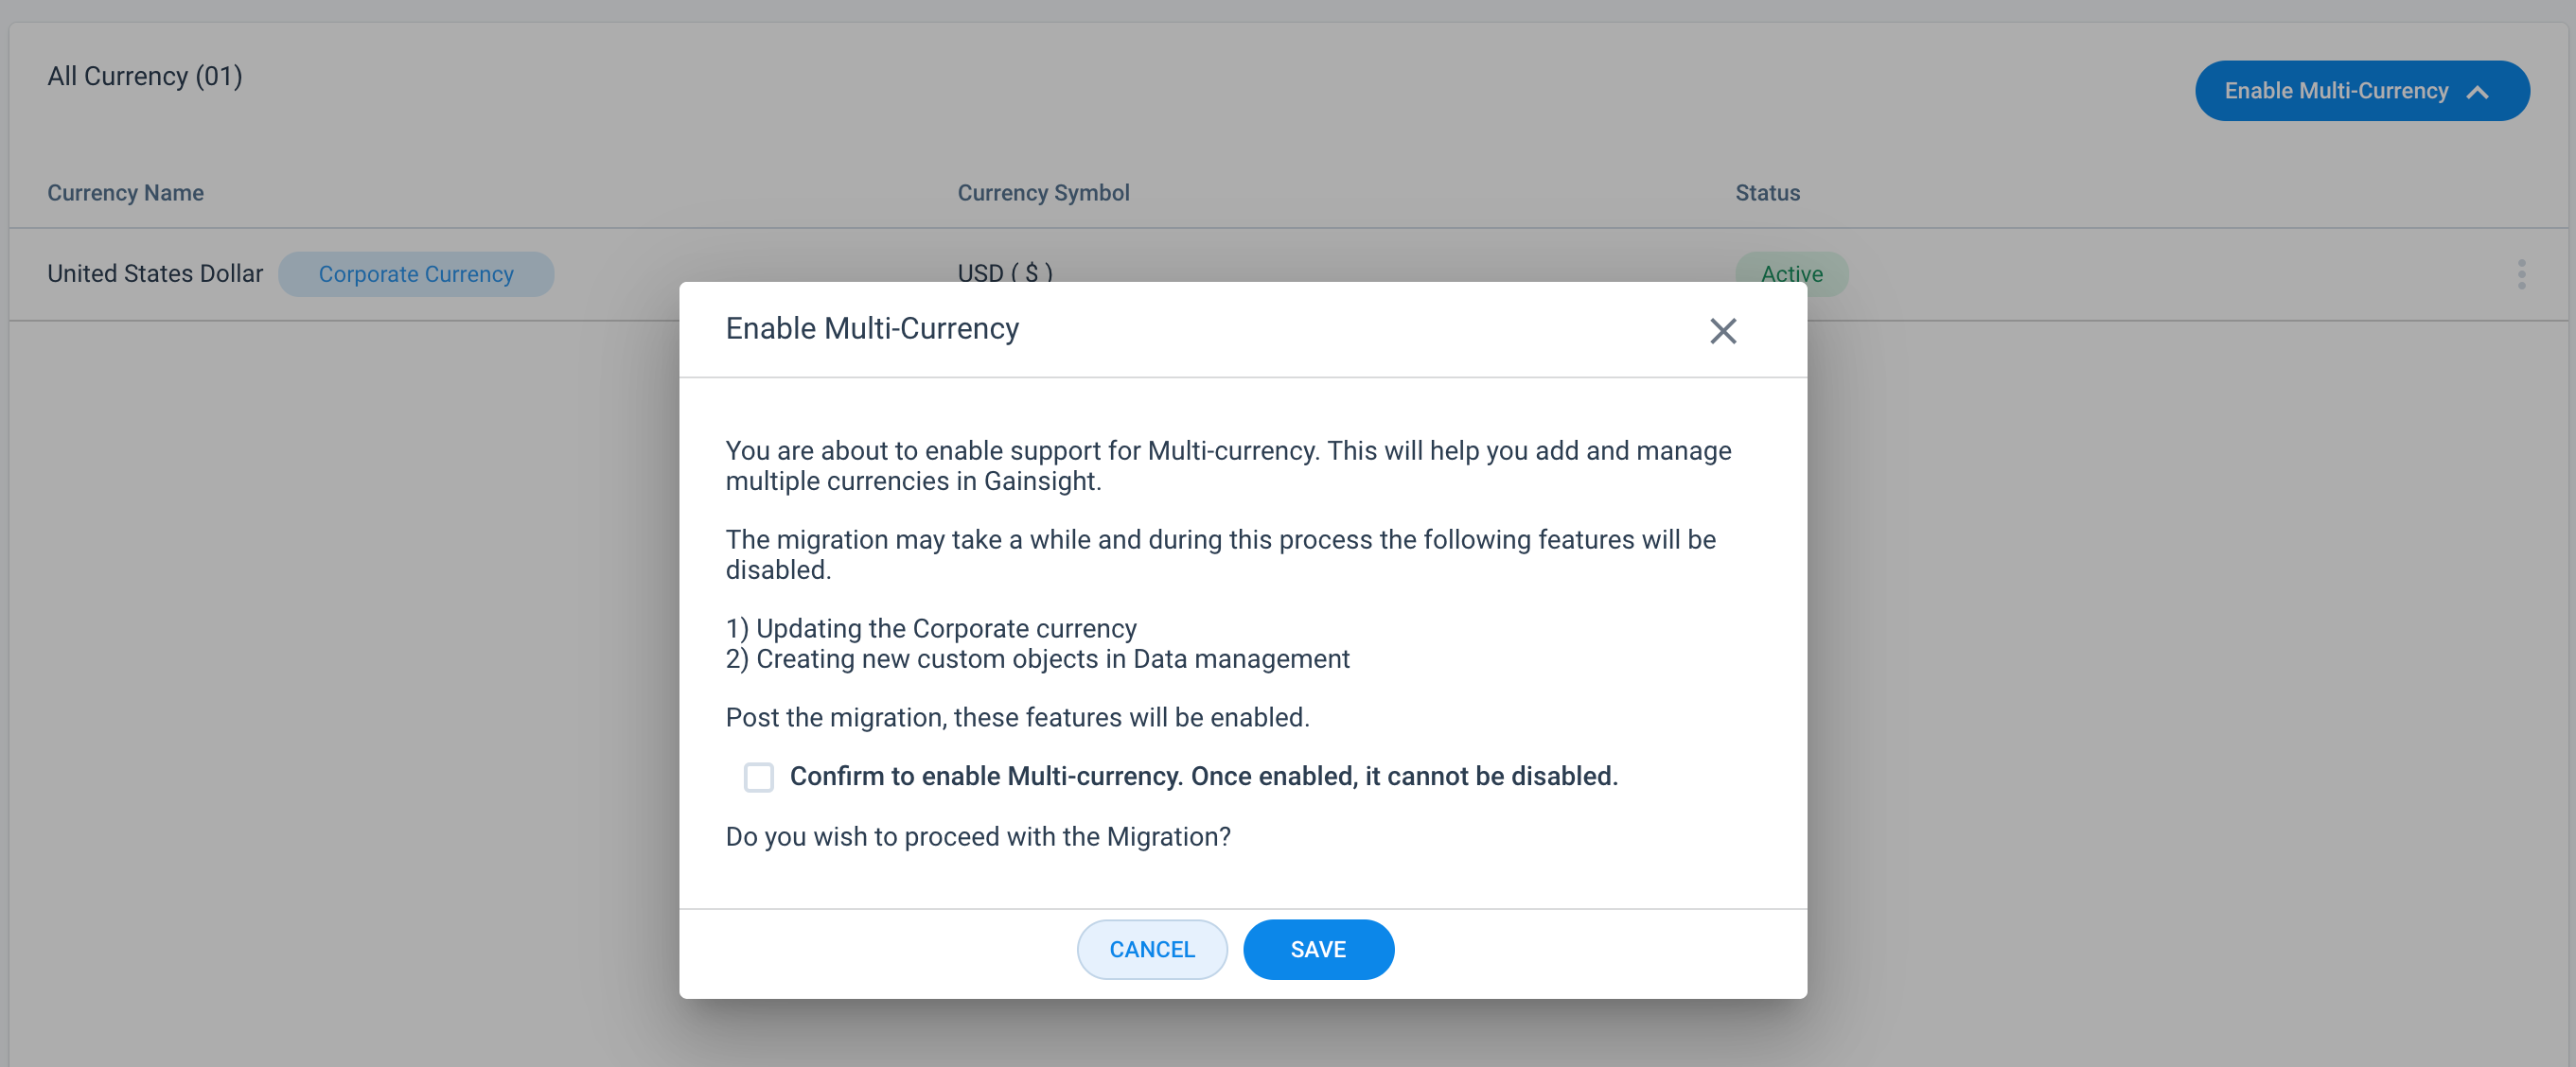 Enable Multi-Currency Dialog.png